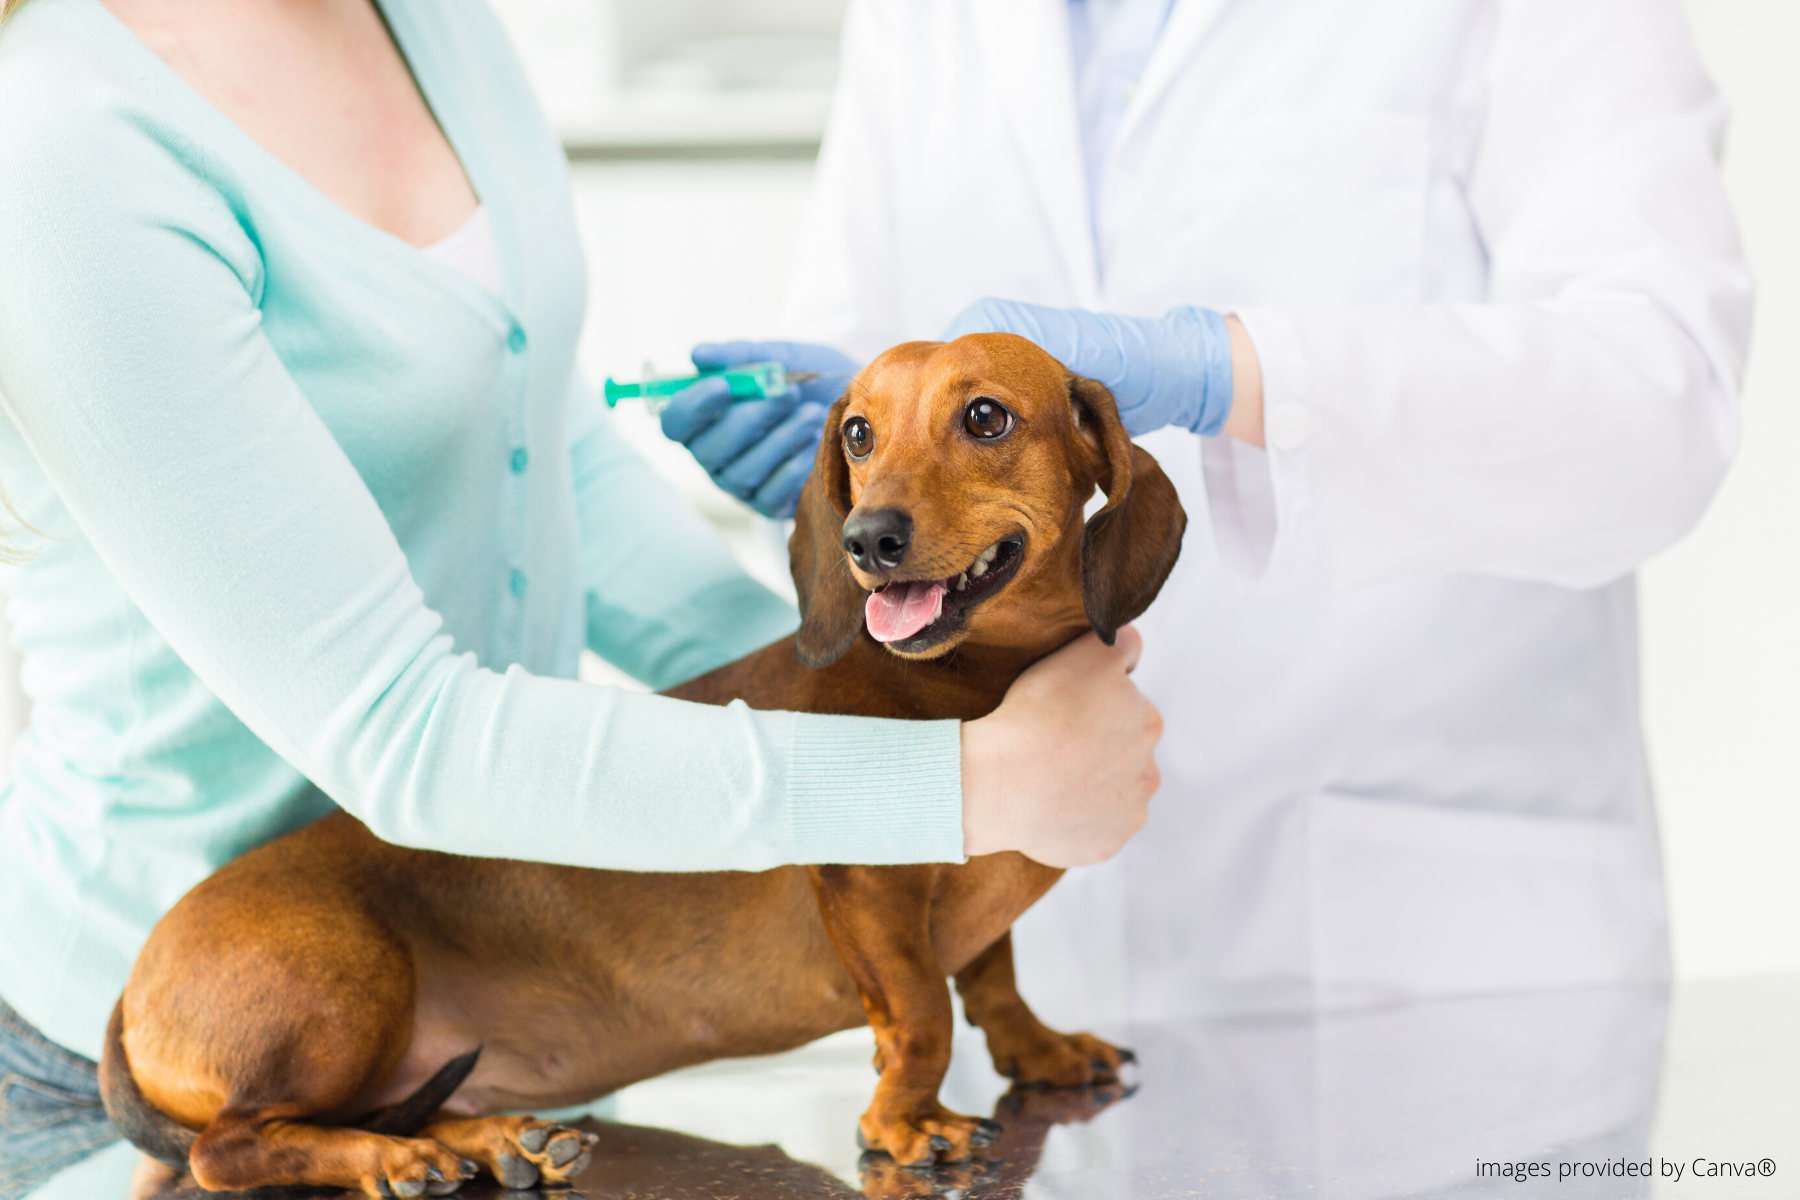 dachshund sitting on a veterinary exam table getting a vaccine